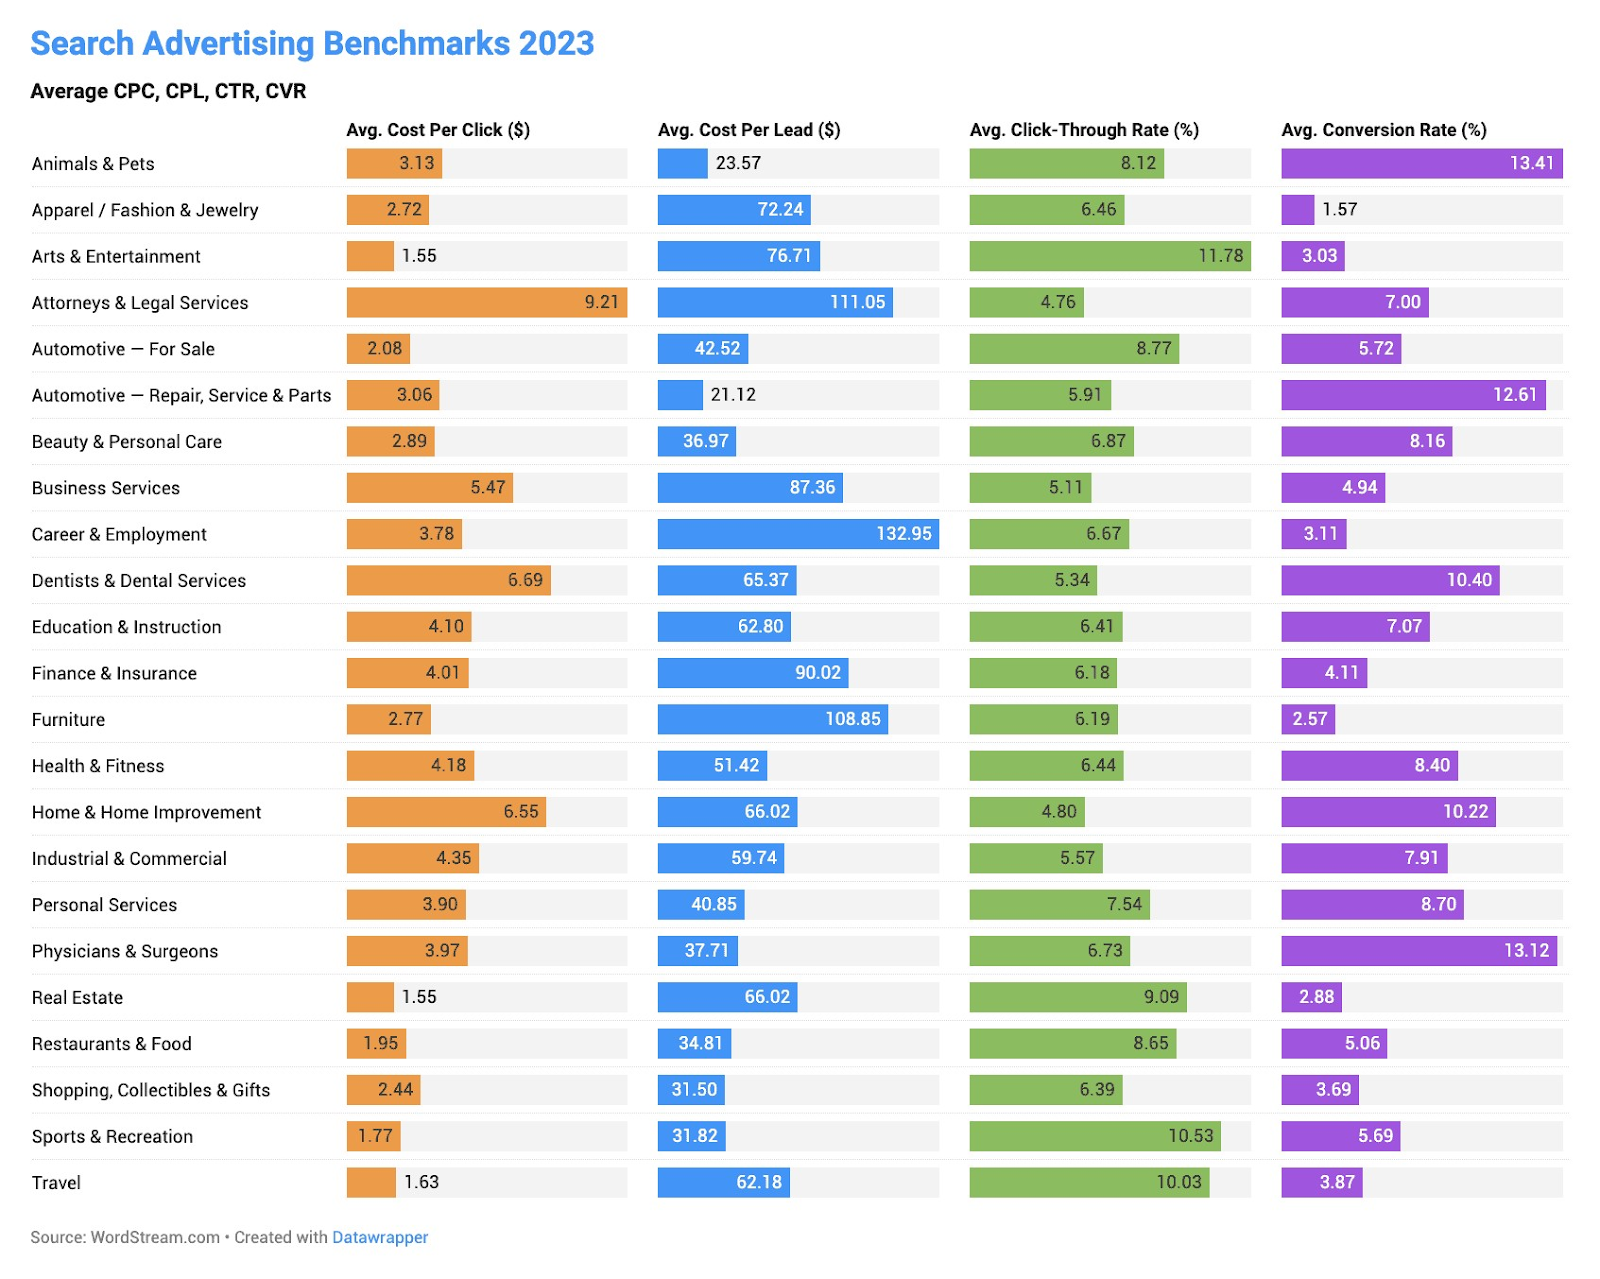 Search advertising benchmarks data for 2023